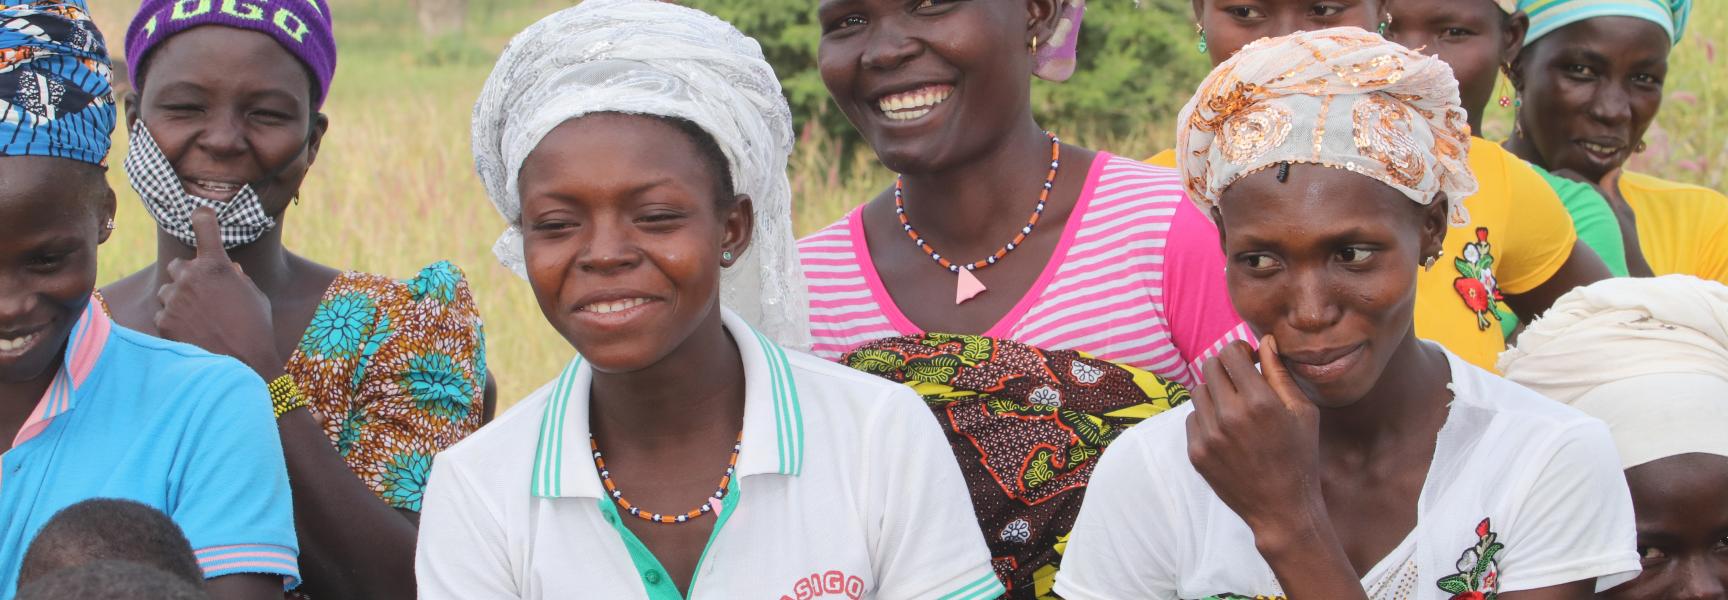 Women from Togo